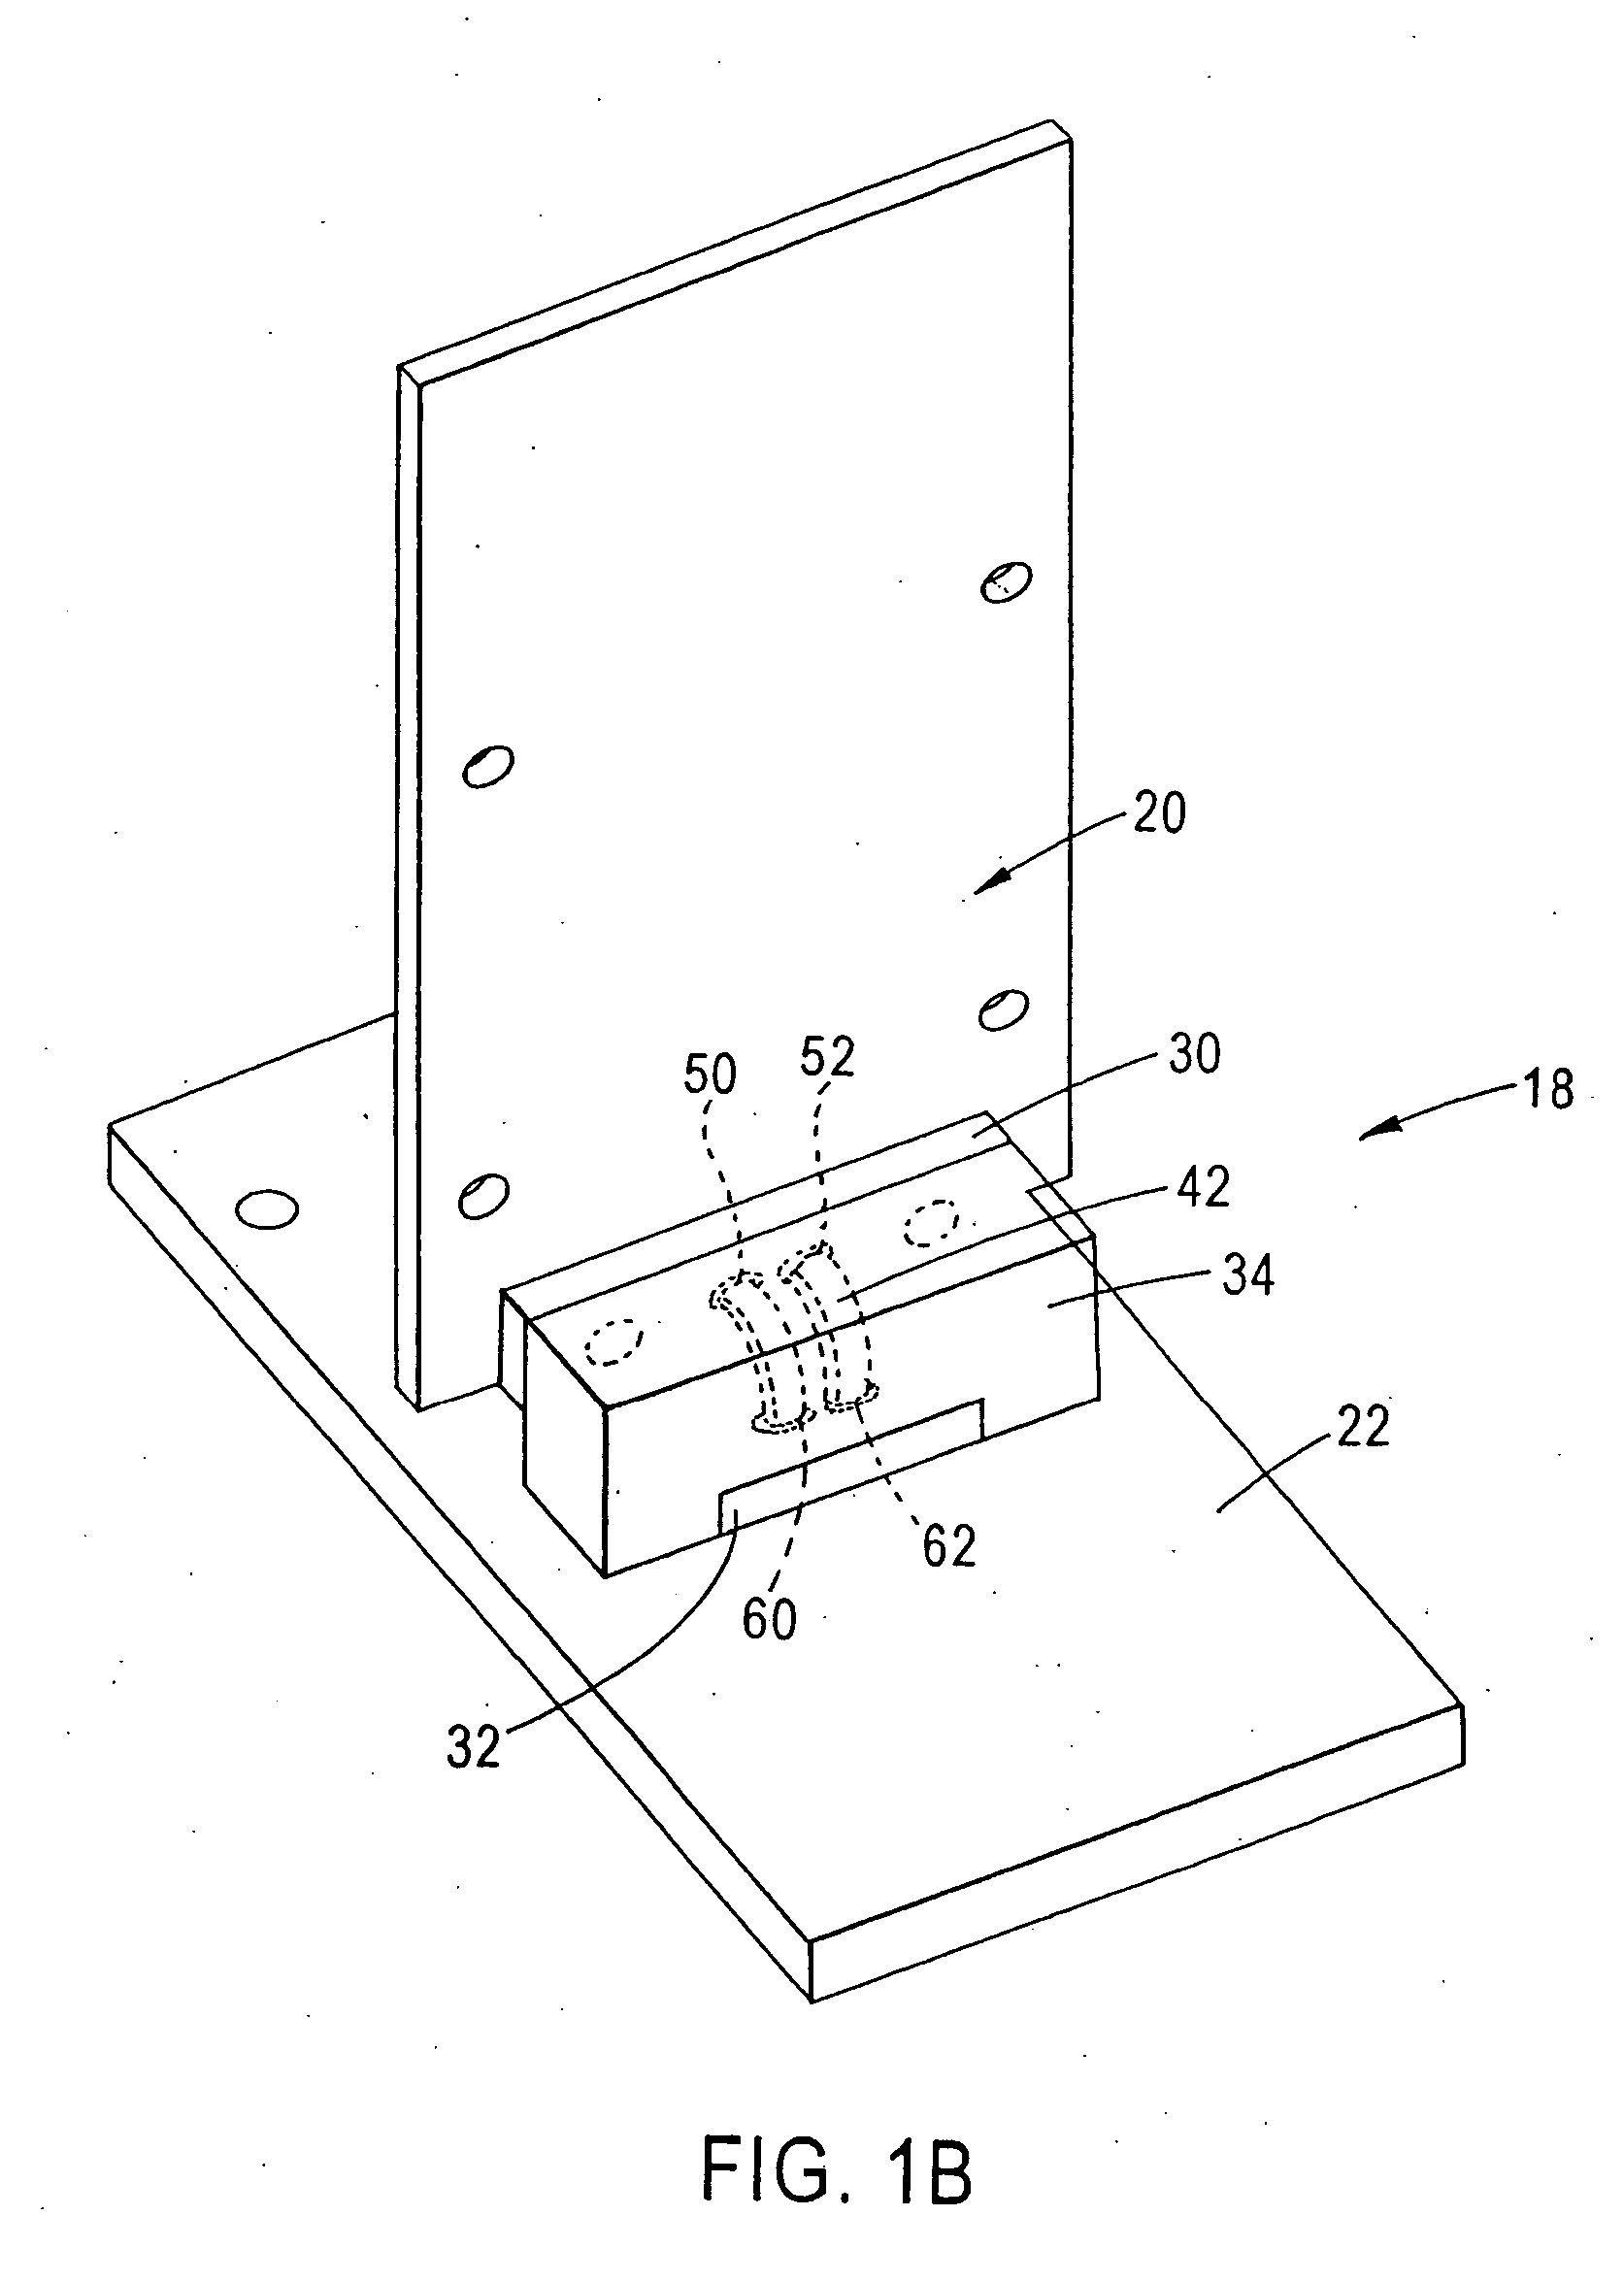 High speed, high density interconnect system for differential and single-ended transmission systems